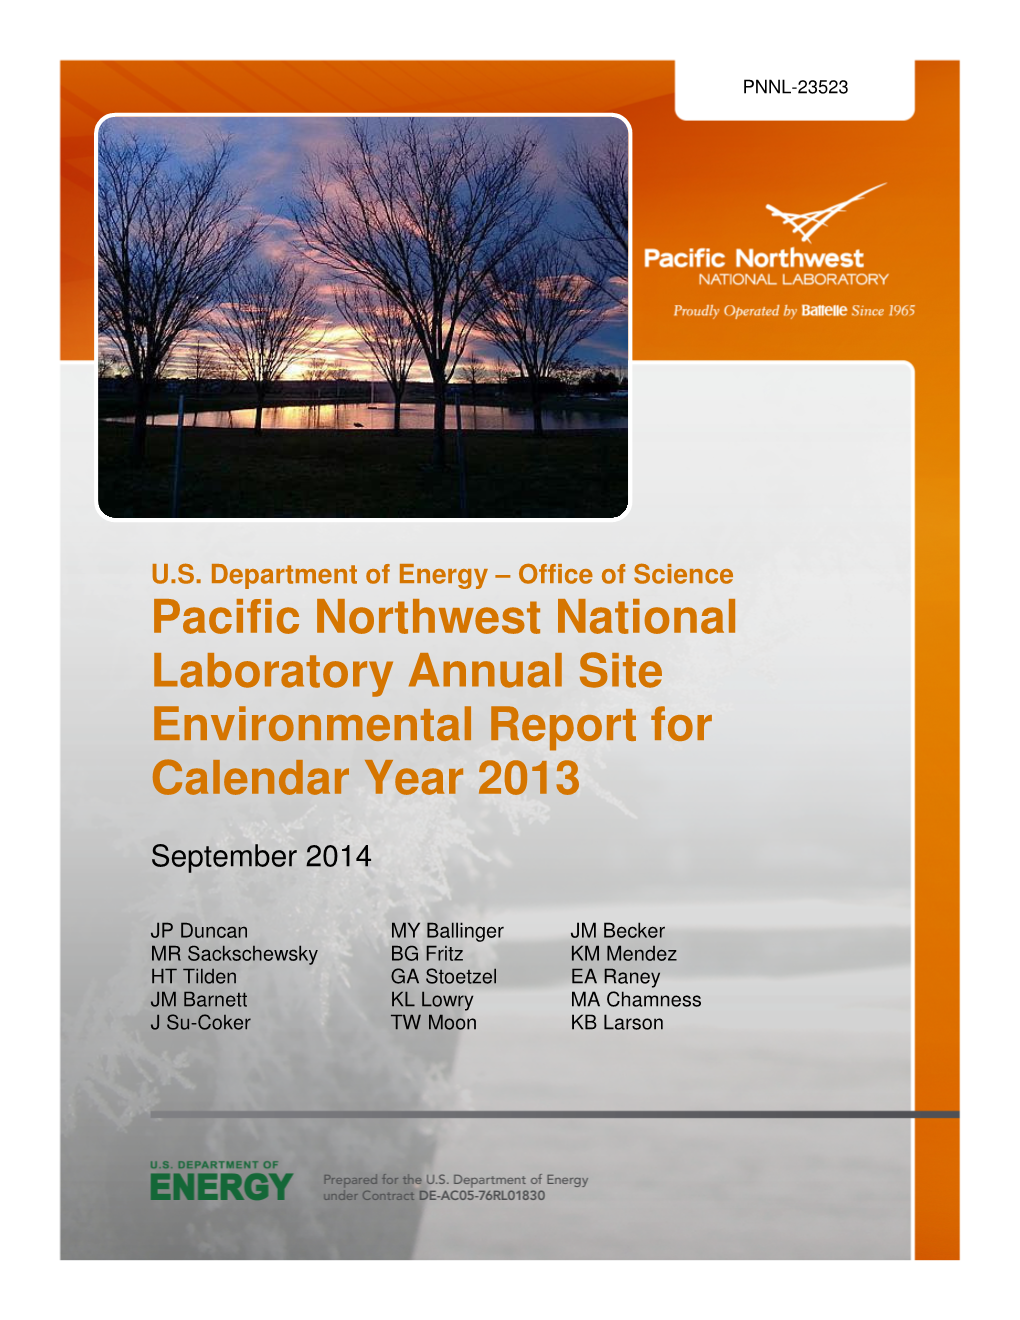 Pacific Northwest National Laboratory Annual Site Environmental Report for Calendar Year 2013